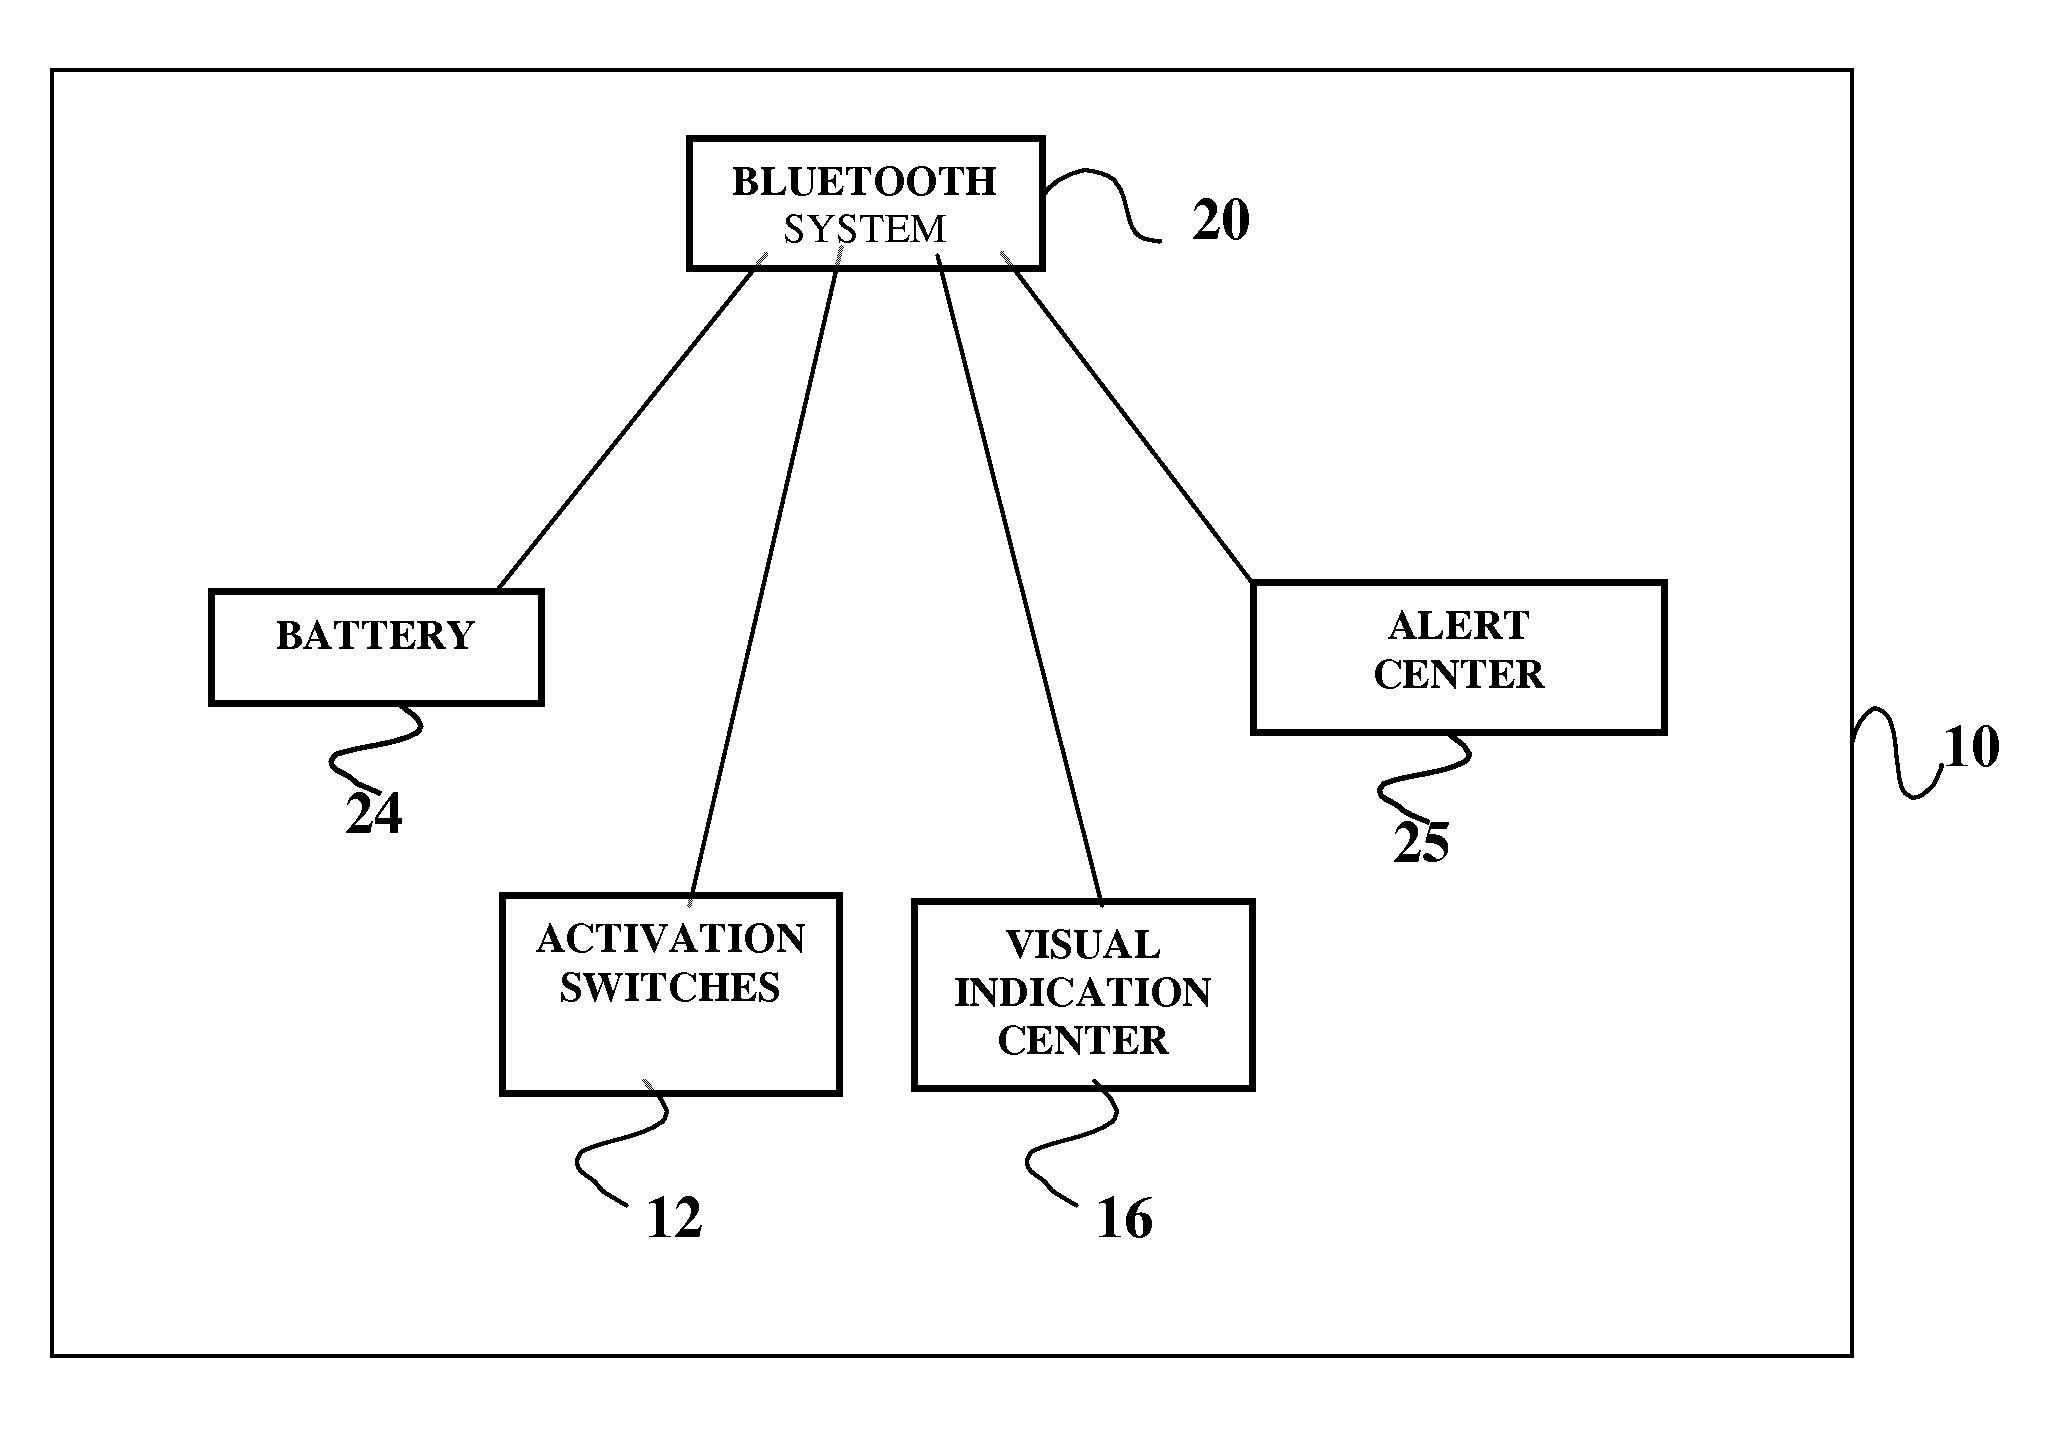 Systems for monitoring proximity to prevent loss or to assist recovery